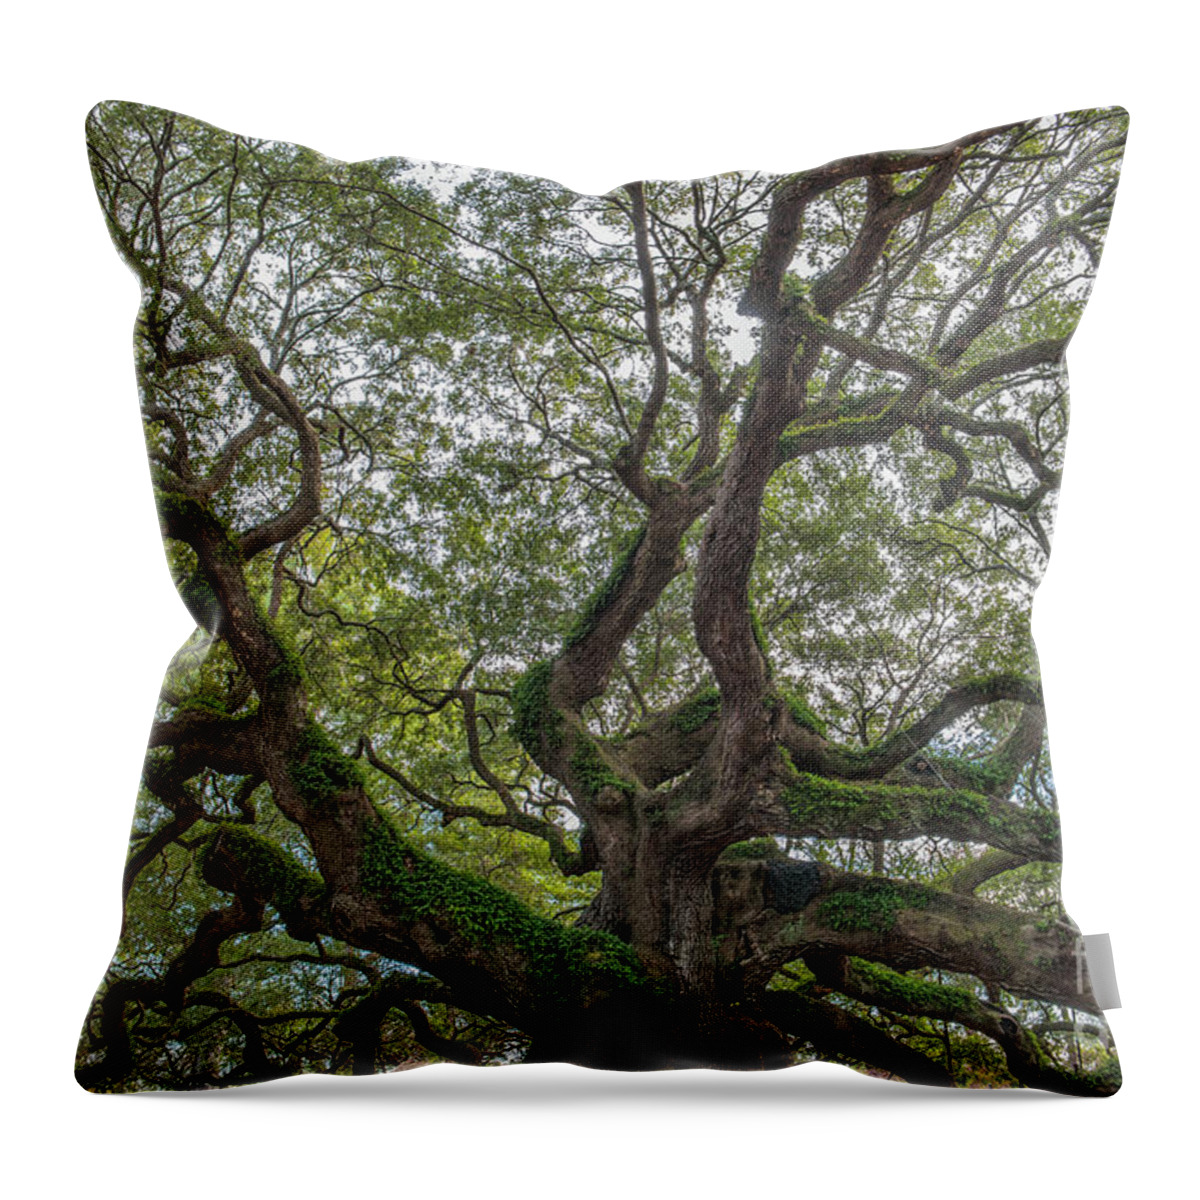 Angel Oak Tree Throw Pillow featuring the photograph Angel Limbs - Johns Island by Dale Powell